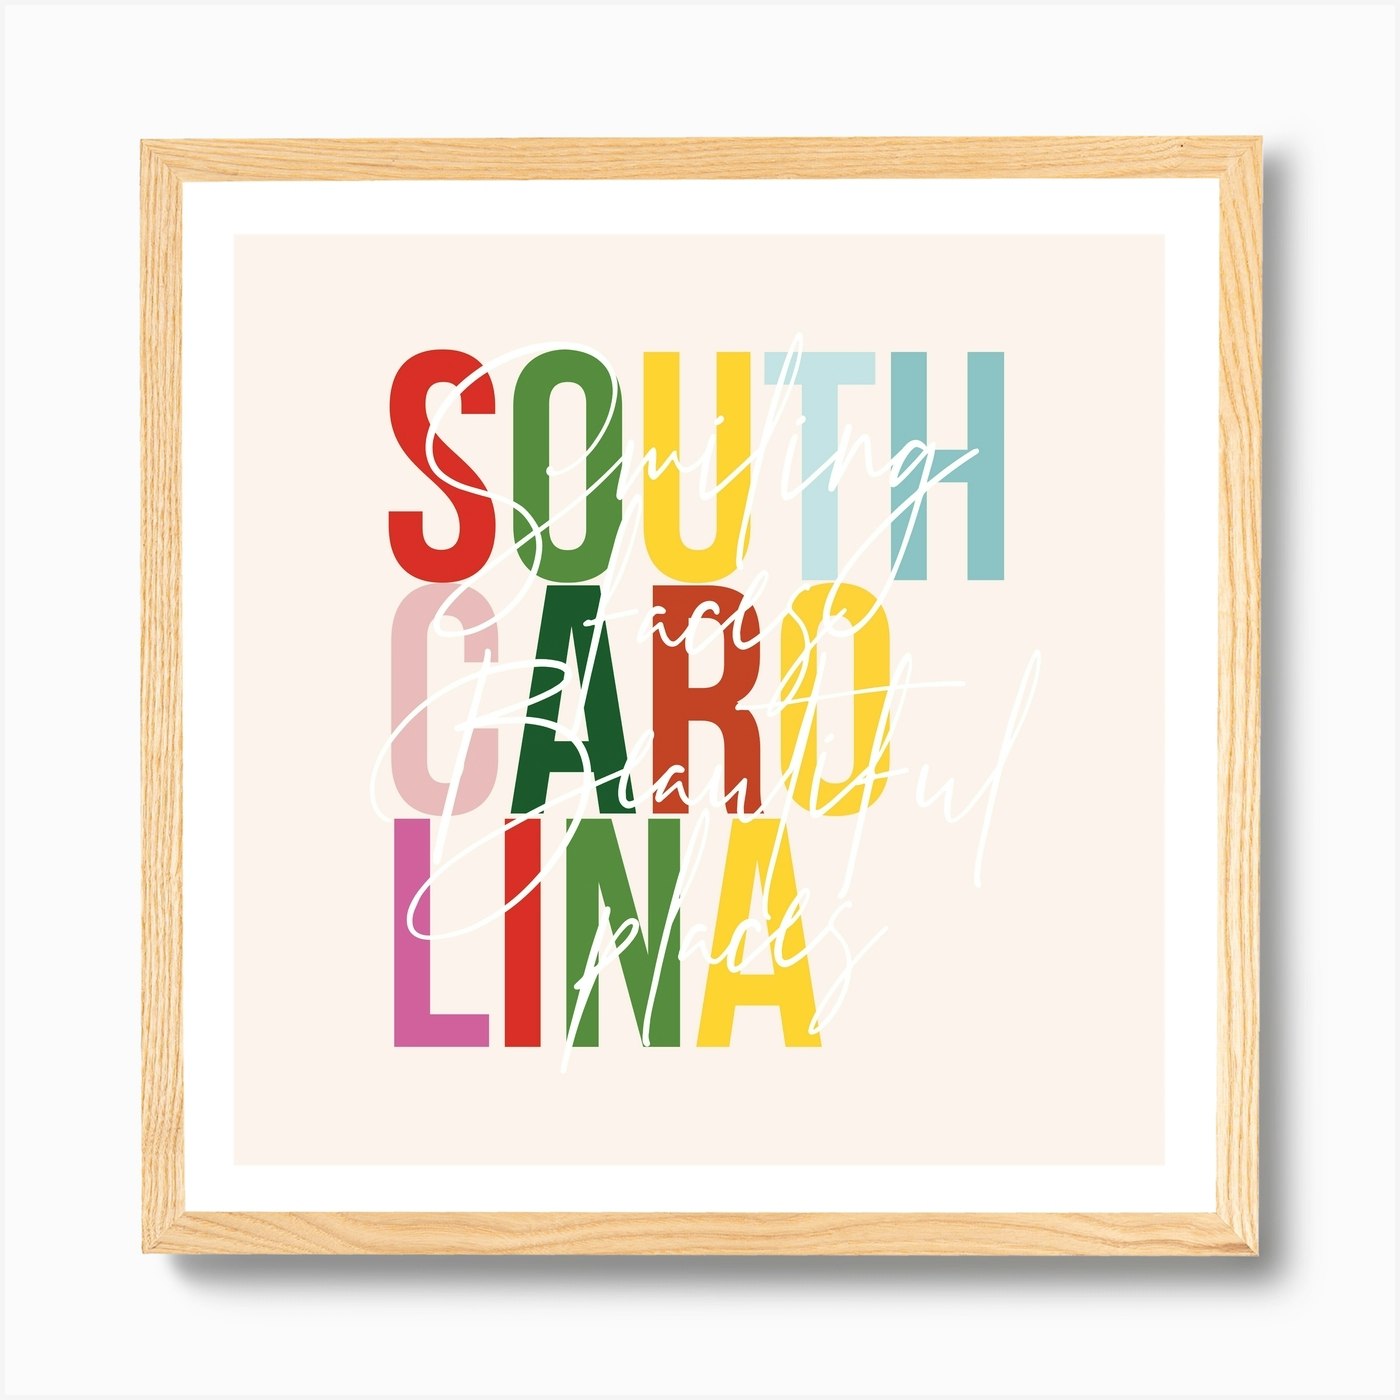 South Carolina Smiling Faces Beautiful Places Color Art Print By Typologie Paper Co Fy